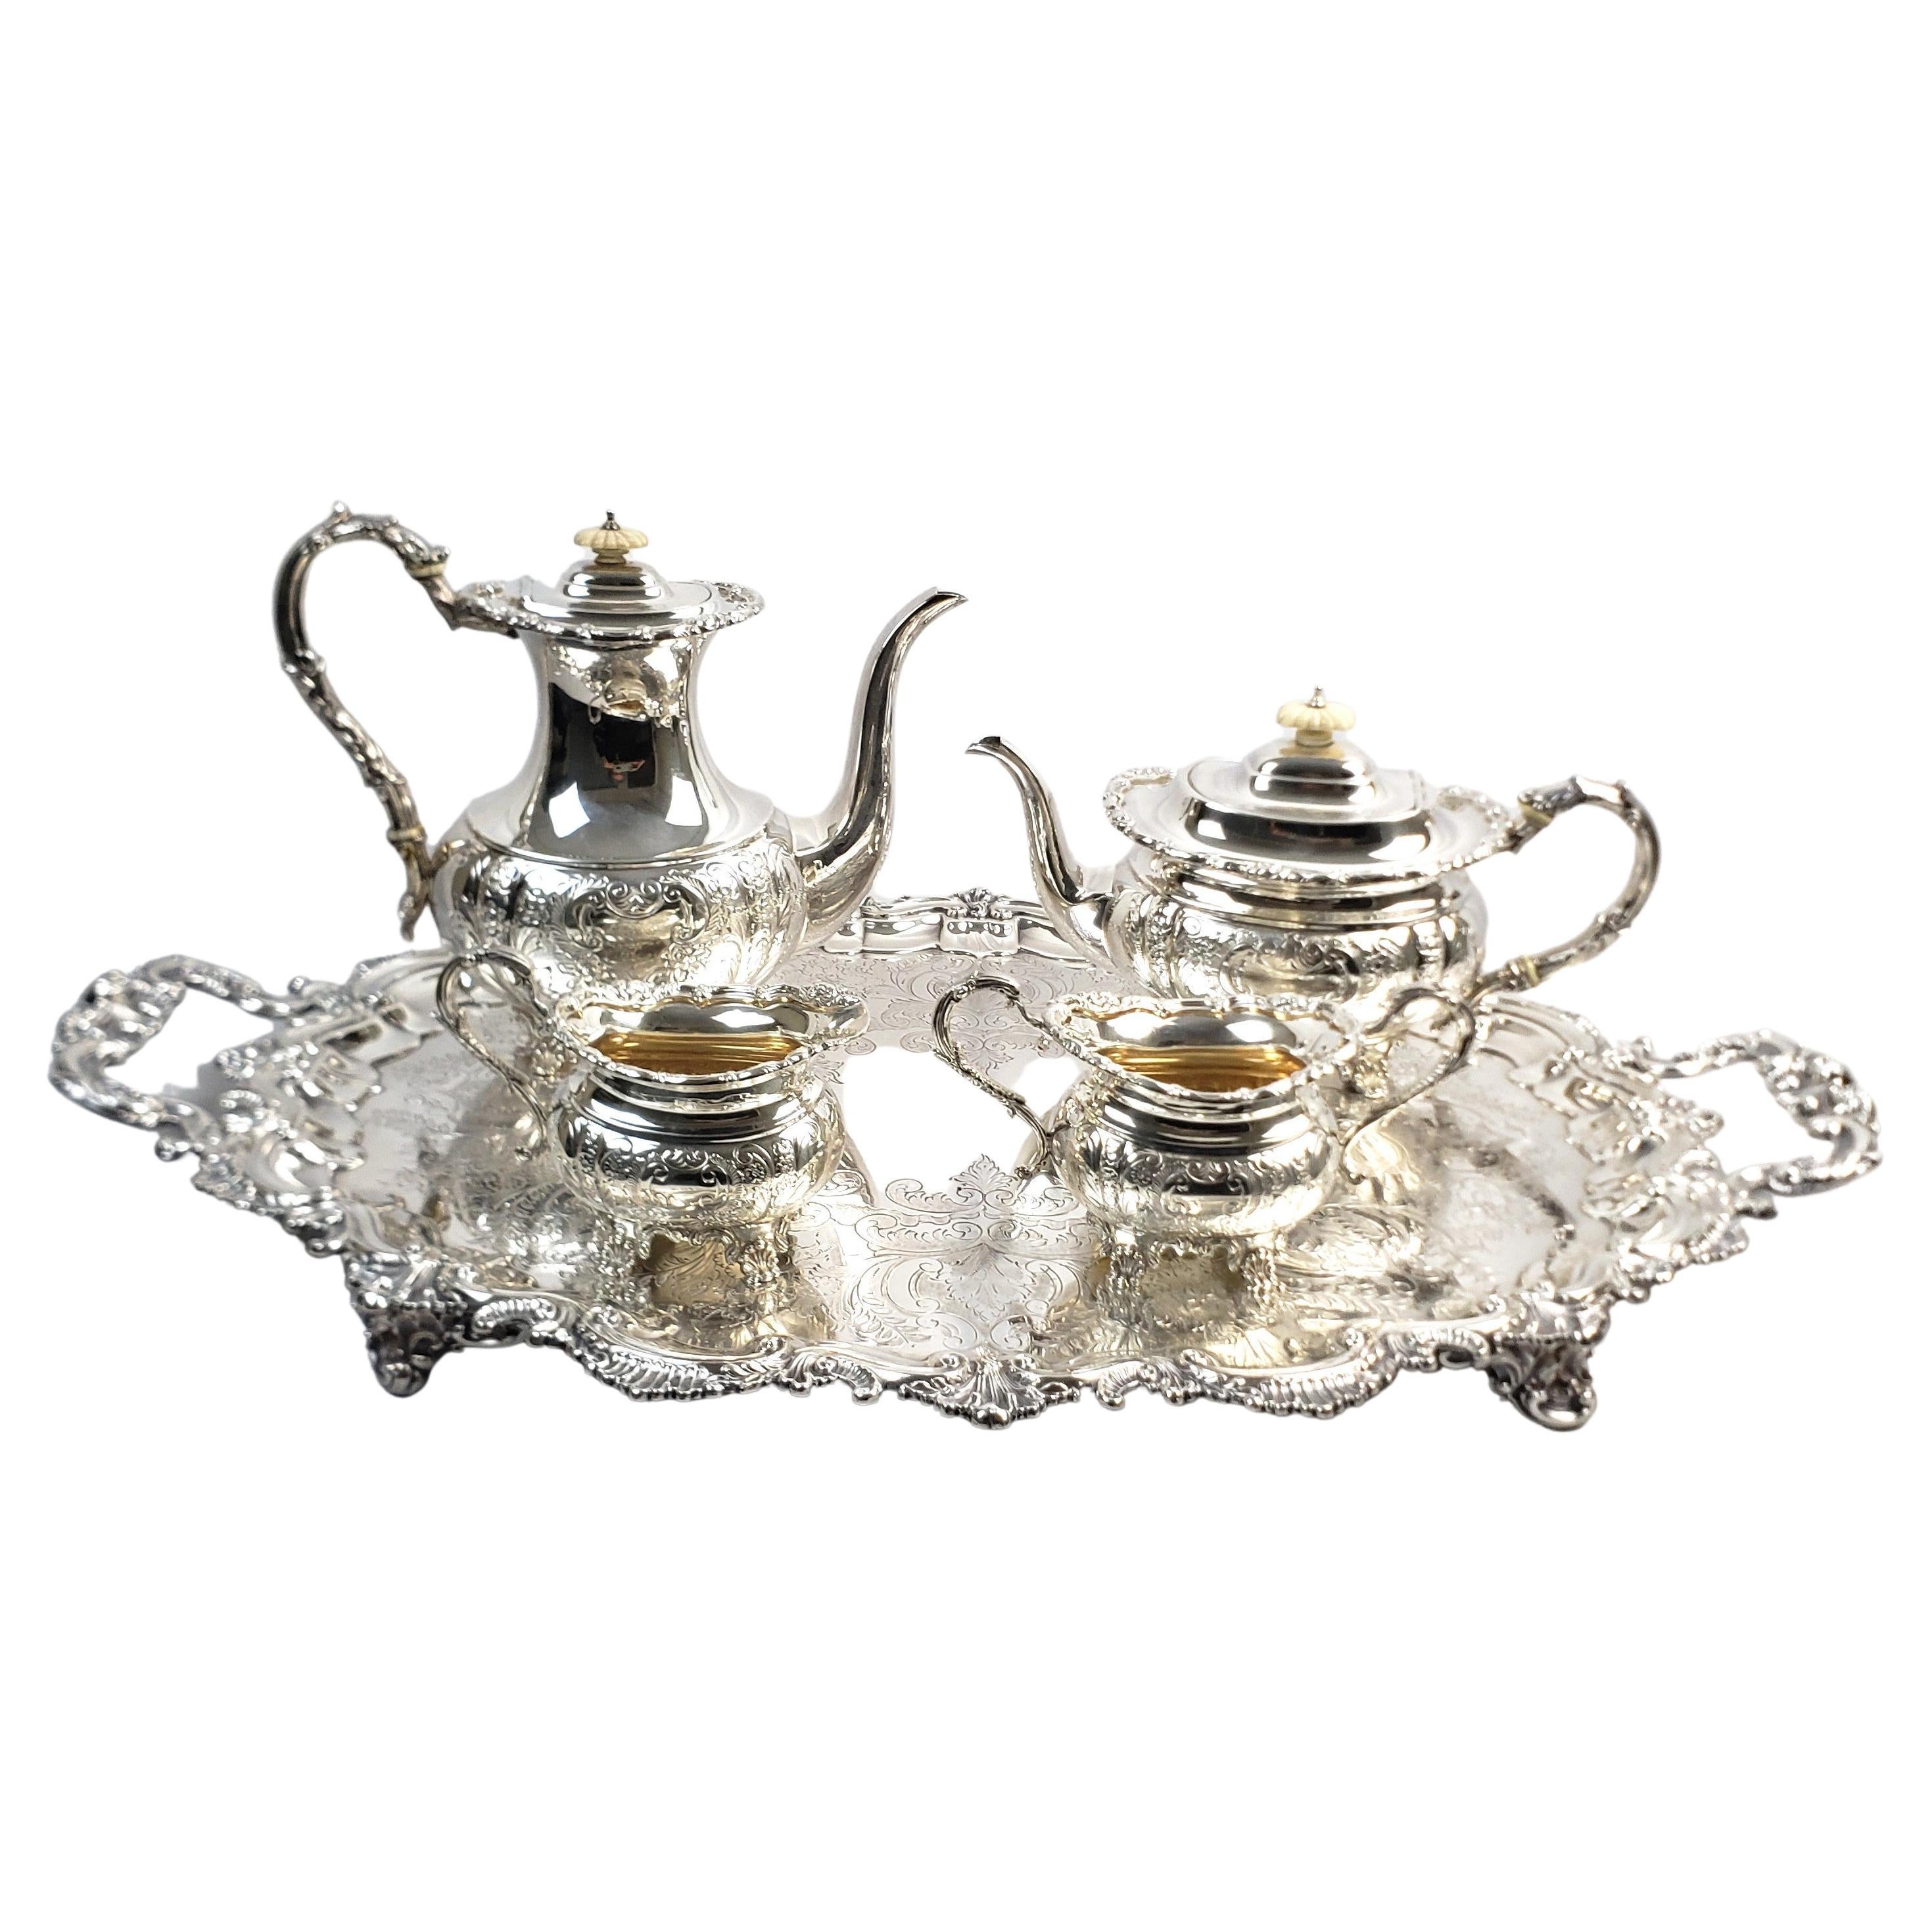 Antique English Sterling Silver Tea Set on Huge Silver Plated Serving Tray